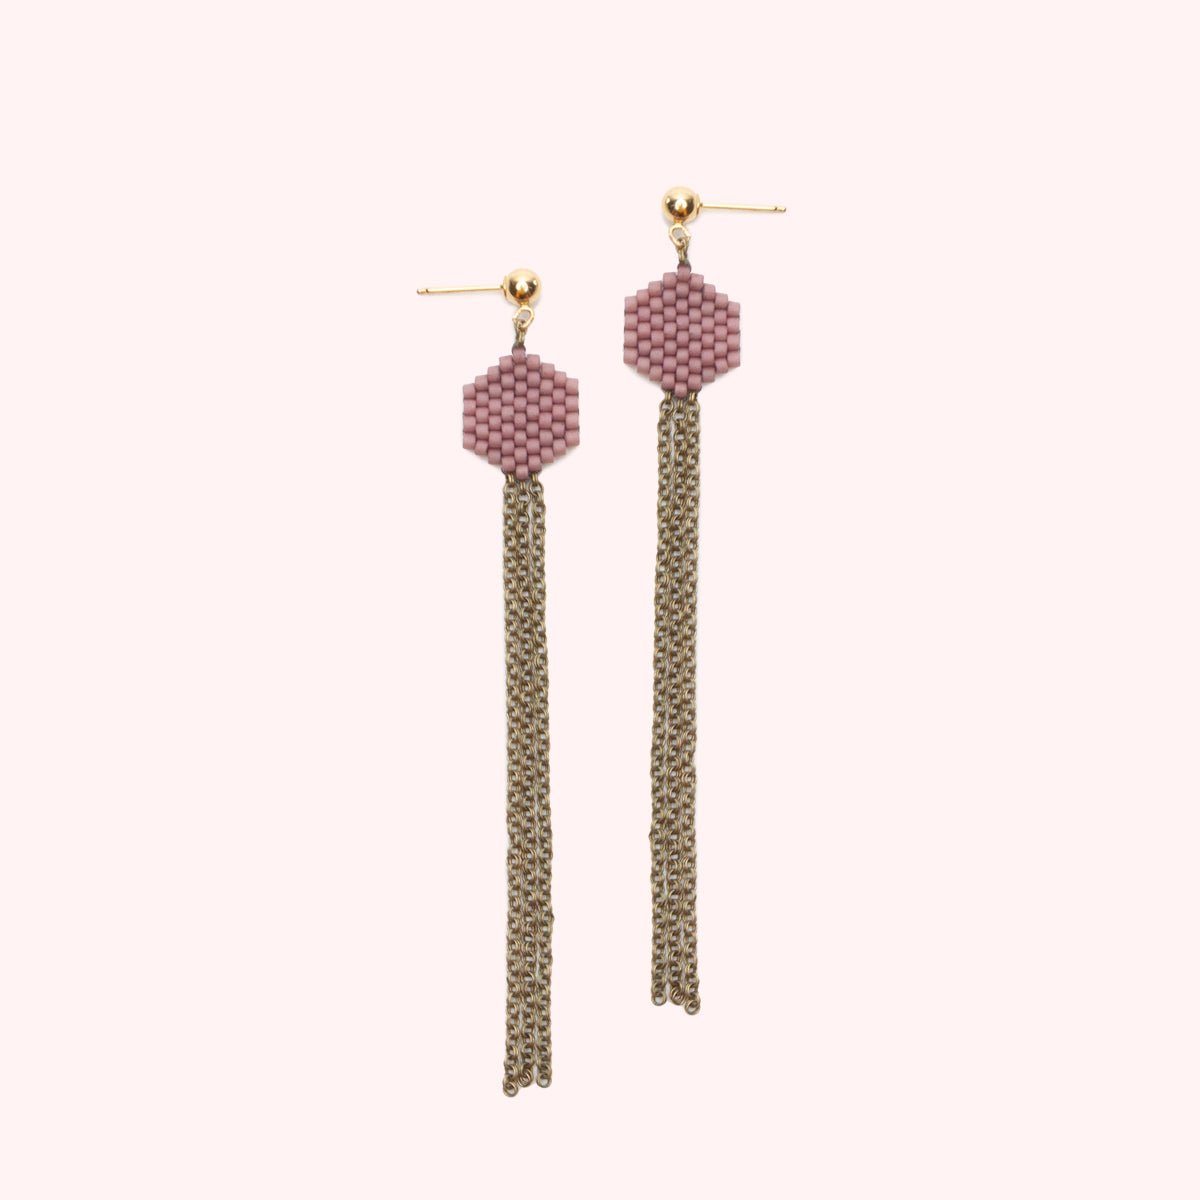 A gold-fill stud earring holds a small beaded hexagon in a mauve color. A narrow collection of antiqued brass chain hangs from the beaded portion. The Dot Earrings in Pink are designed and handcrafted by A Nod to Design in Portland, OR.